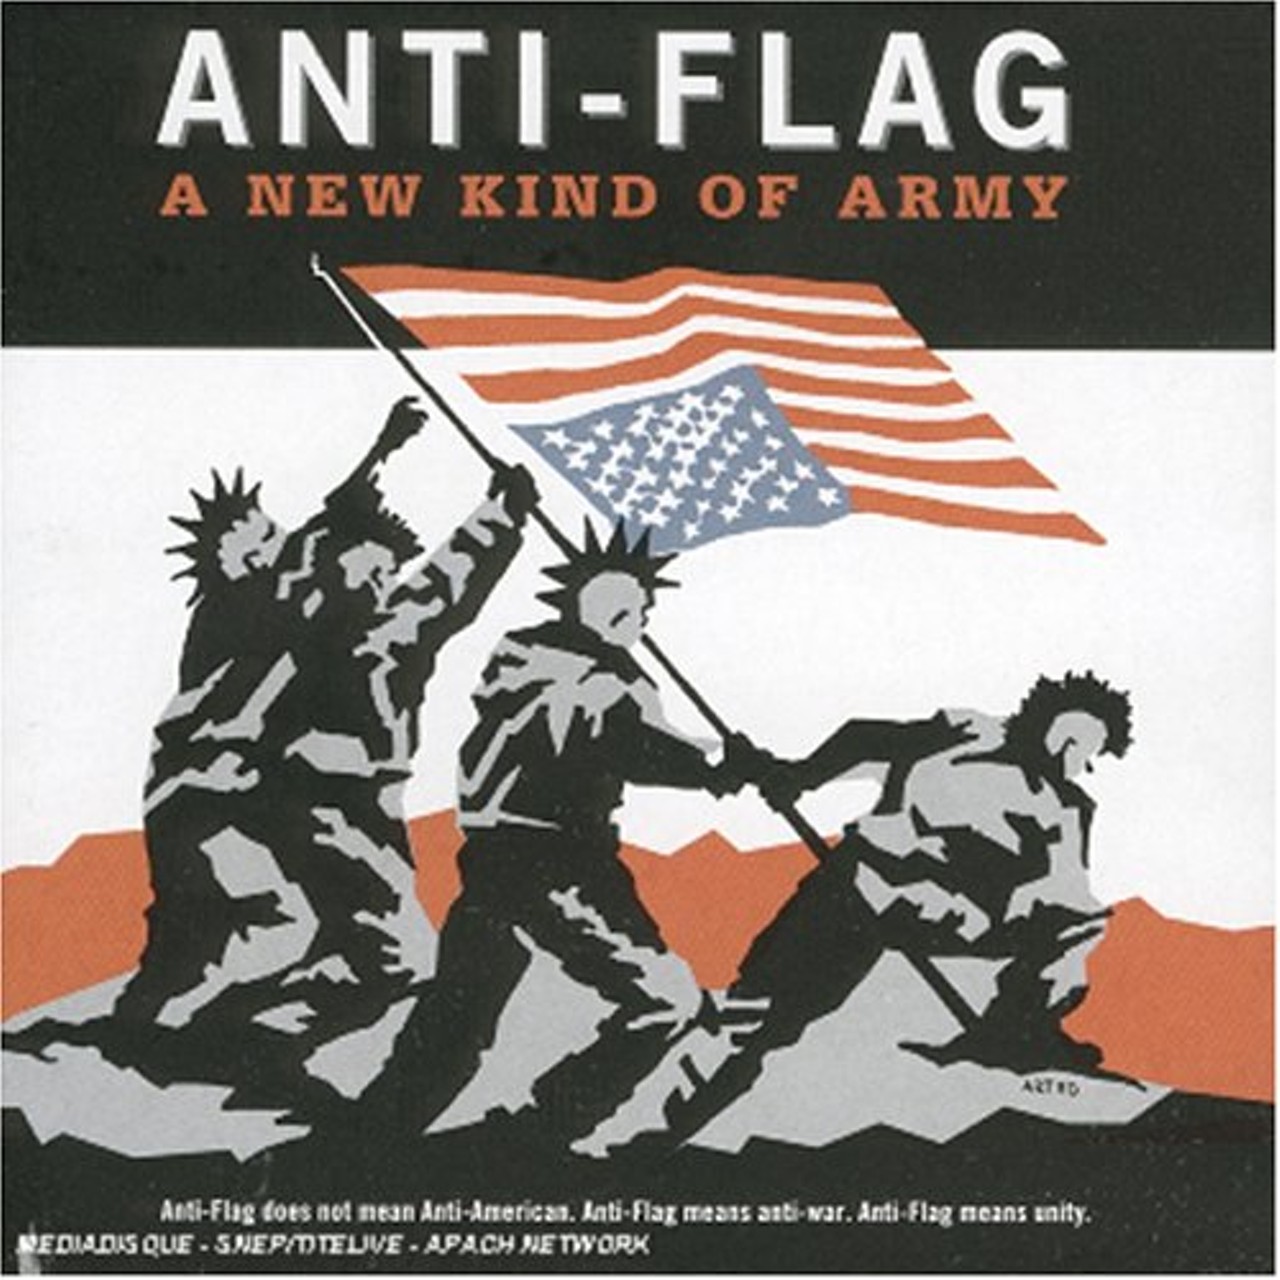 13. Anti-Flag's "A New Kind of Army" lovingly bastardizes Joe Rosenthal's historic photo "Raising the Flag on Iwo Jima" with mohawked men instead of soldiers raising an upside-down flag.